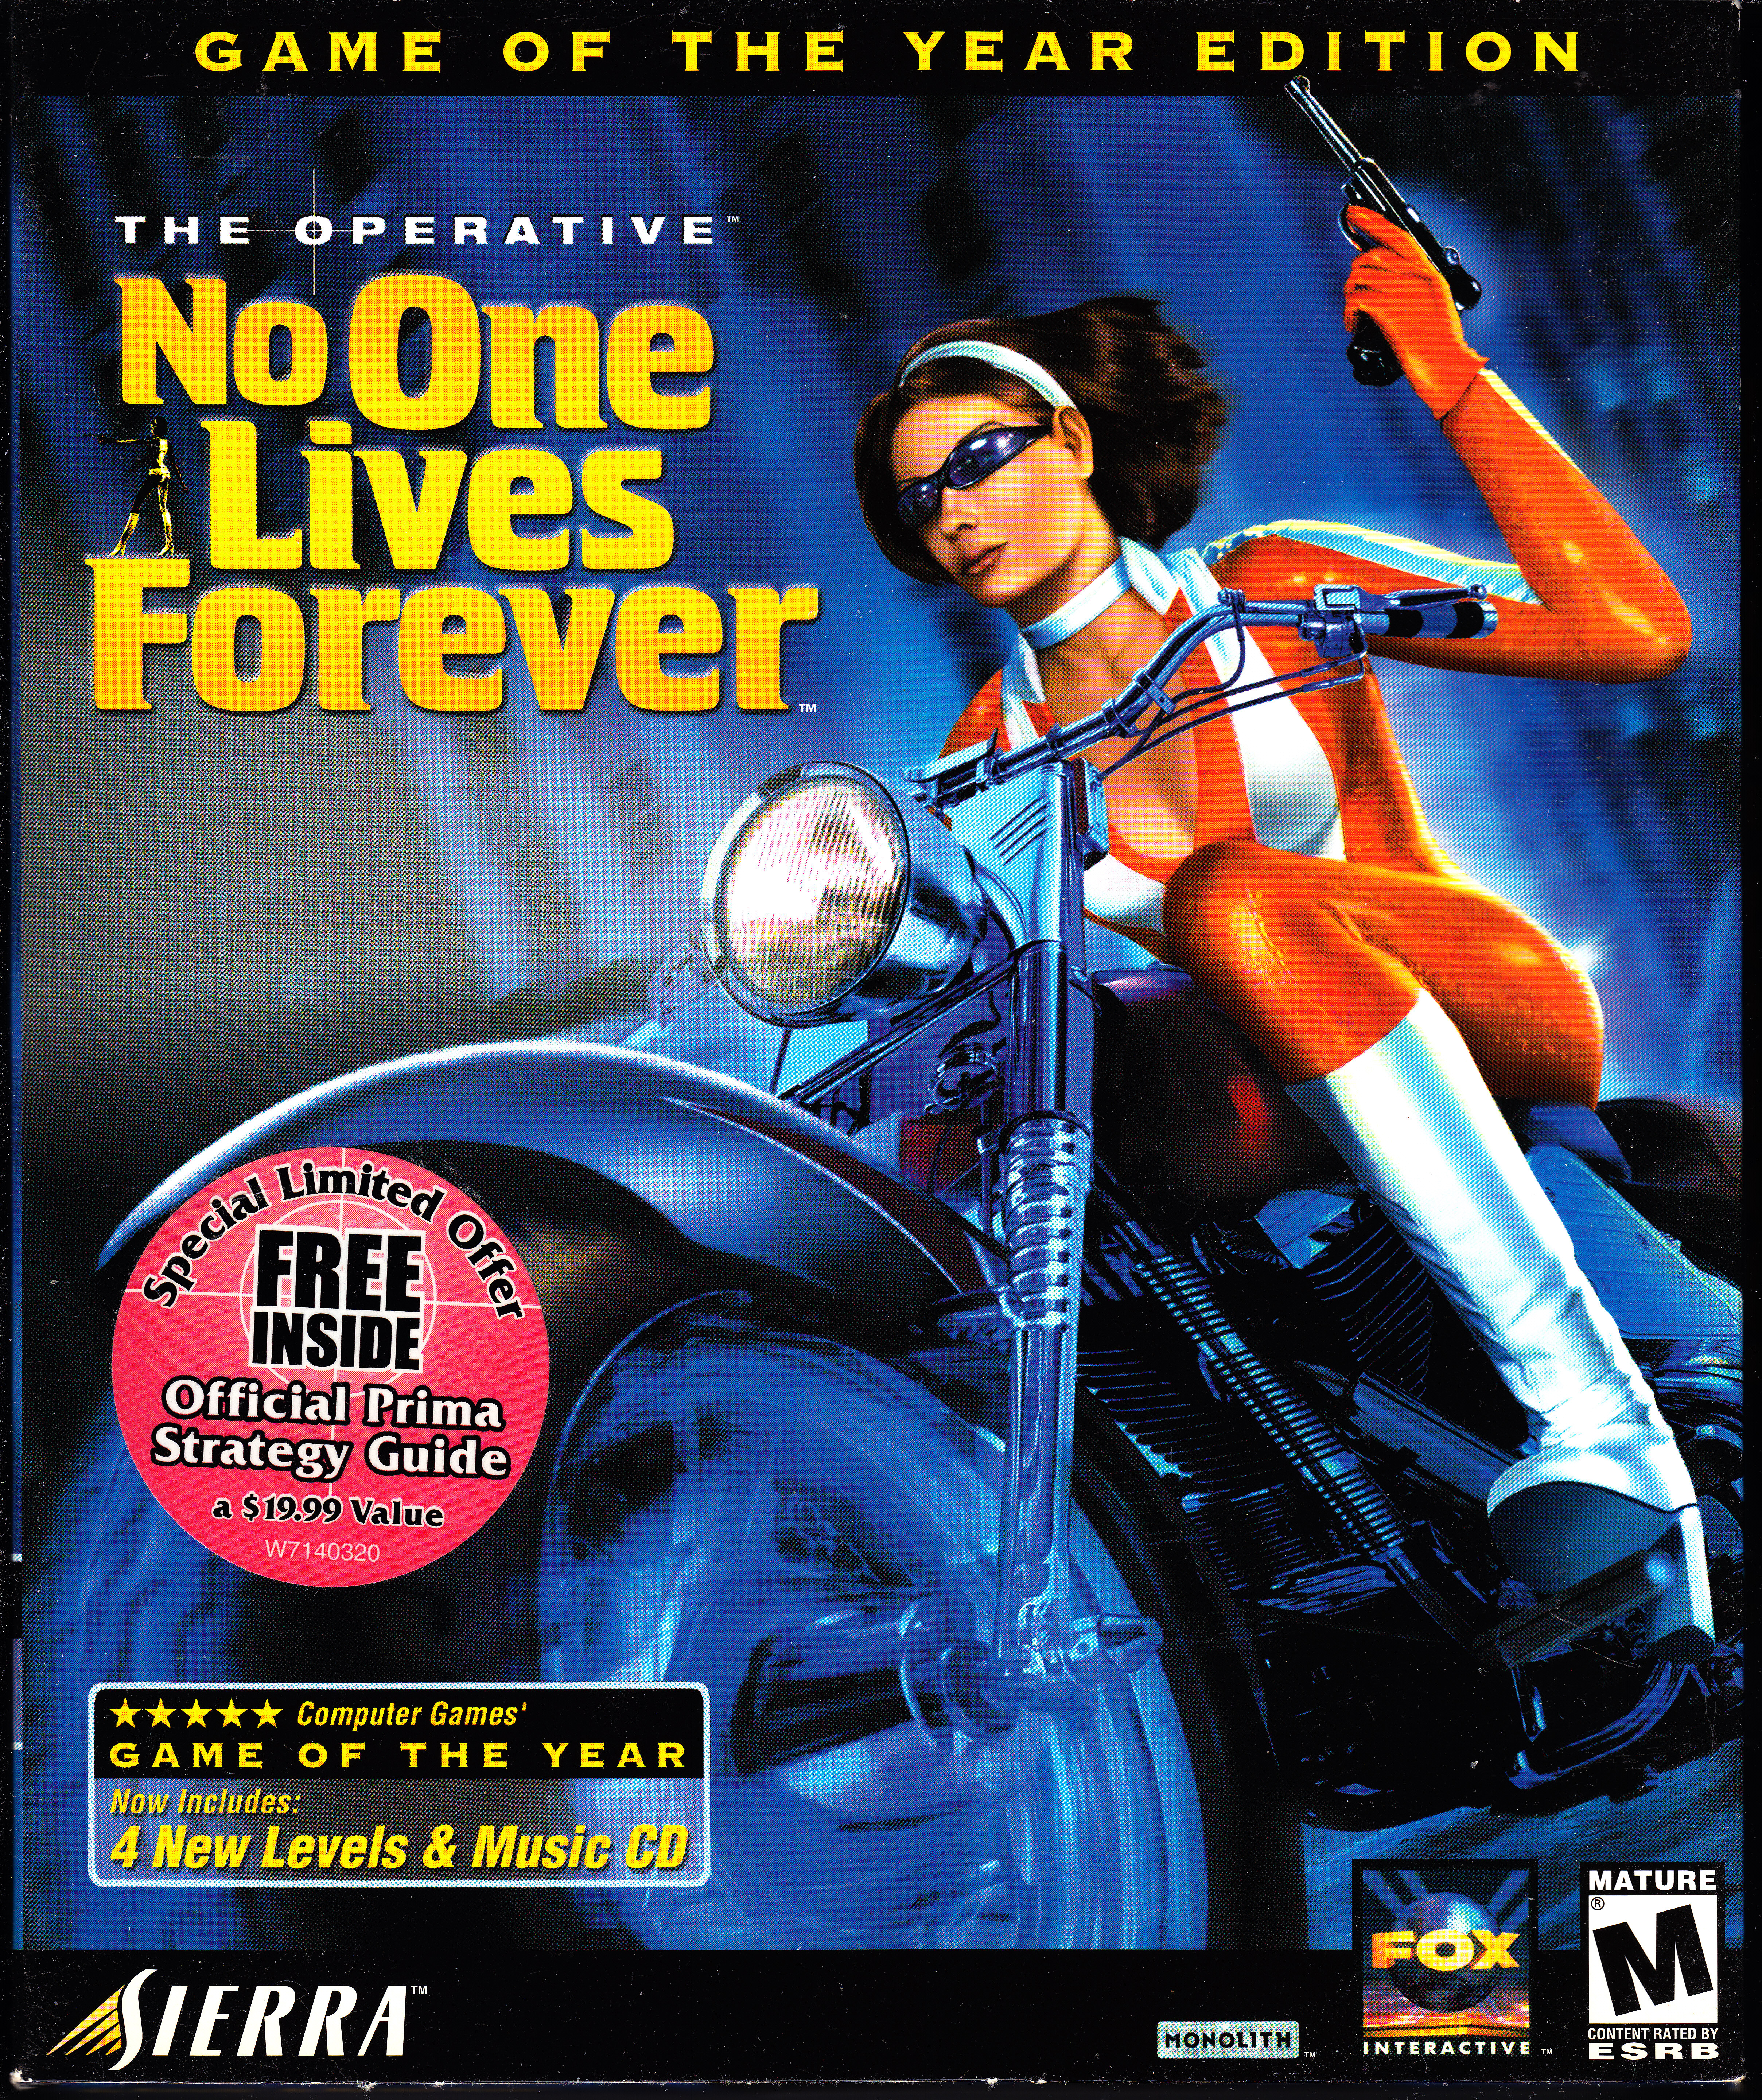 Life is forever. No one Lives Forever. No one Lives Forever 1. The operative: no one Lives Forever. No one Lives Forever 4.